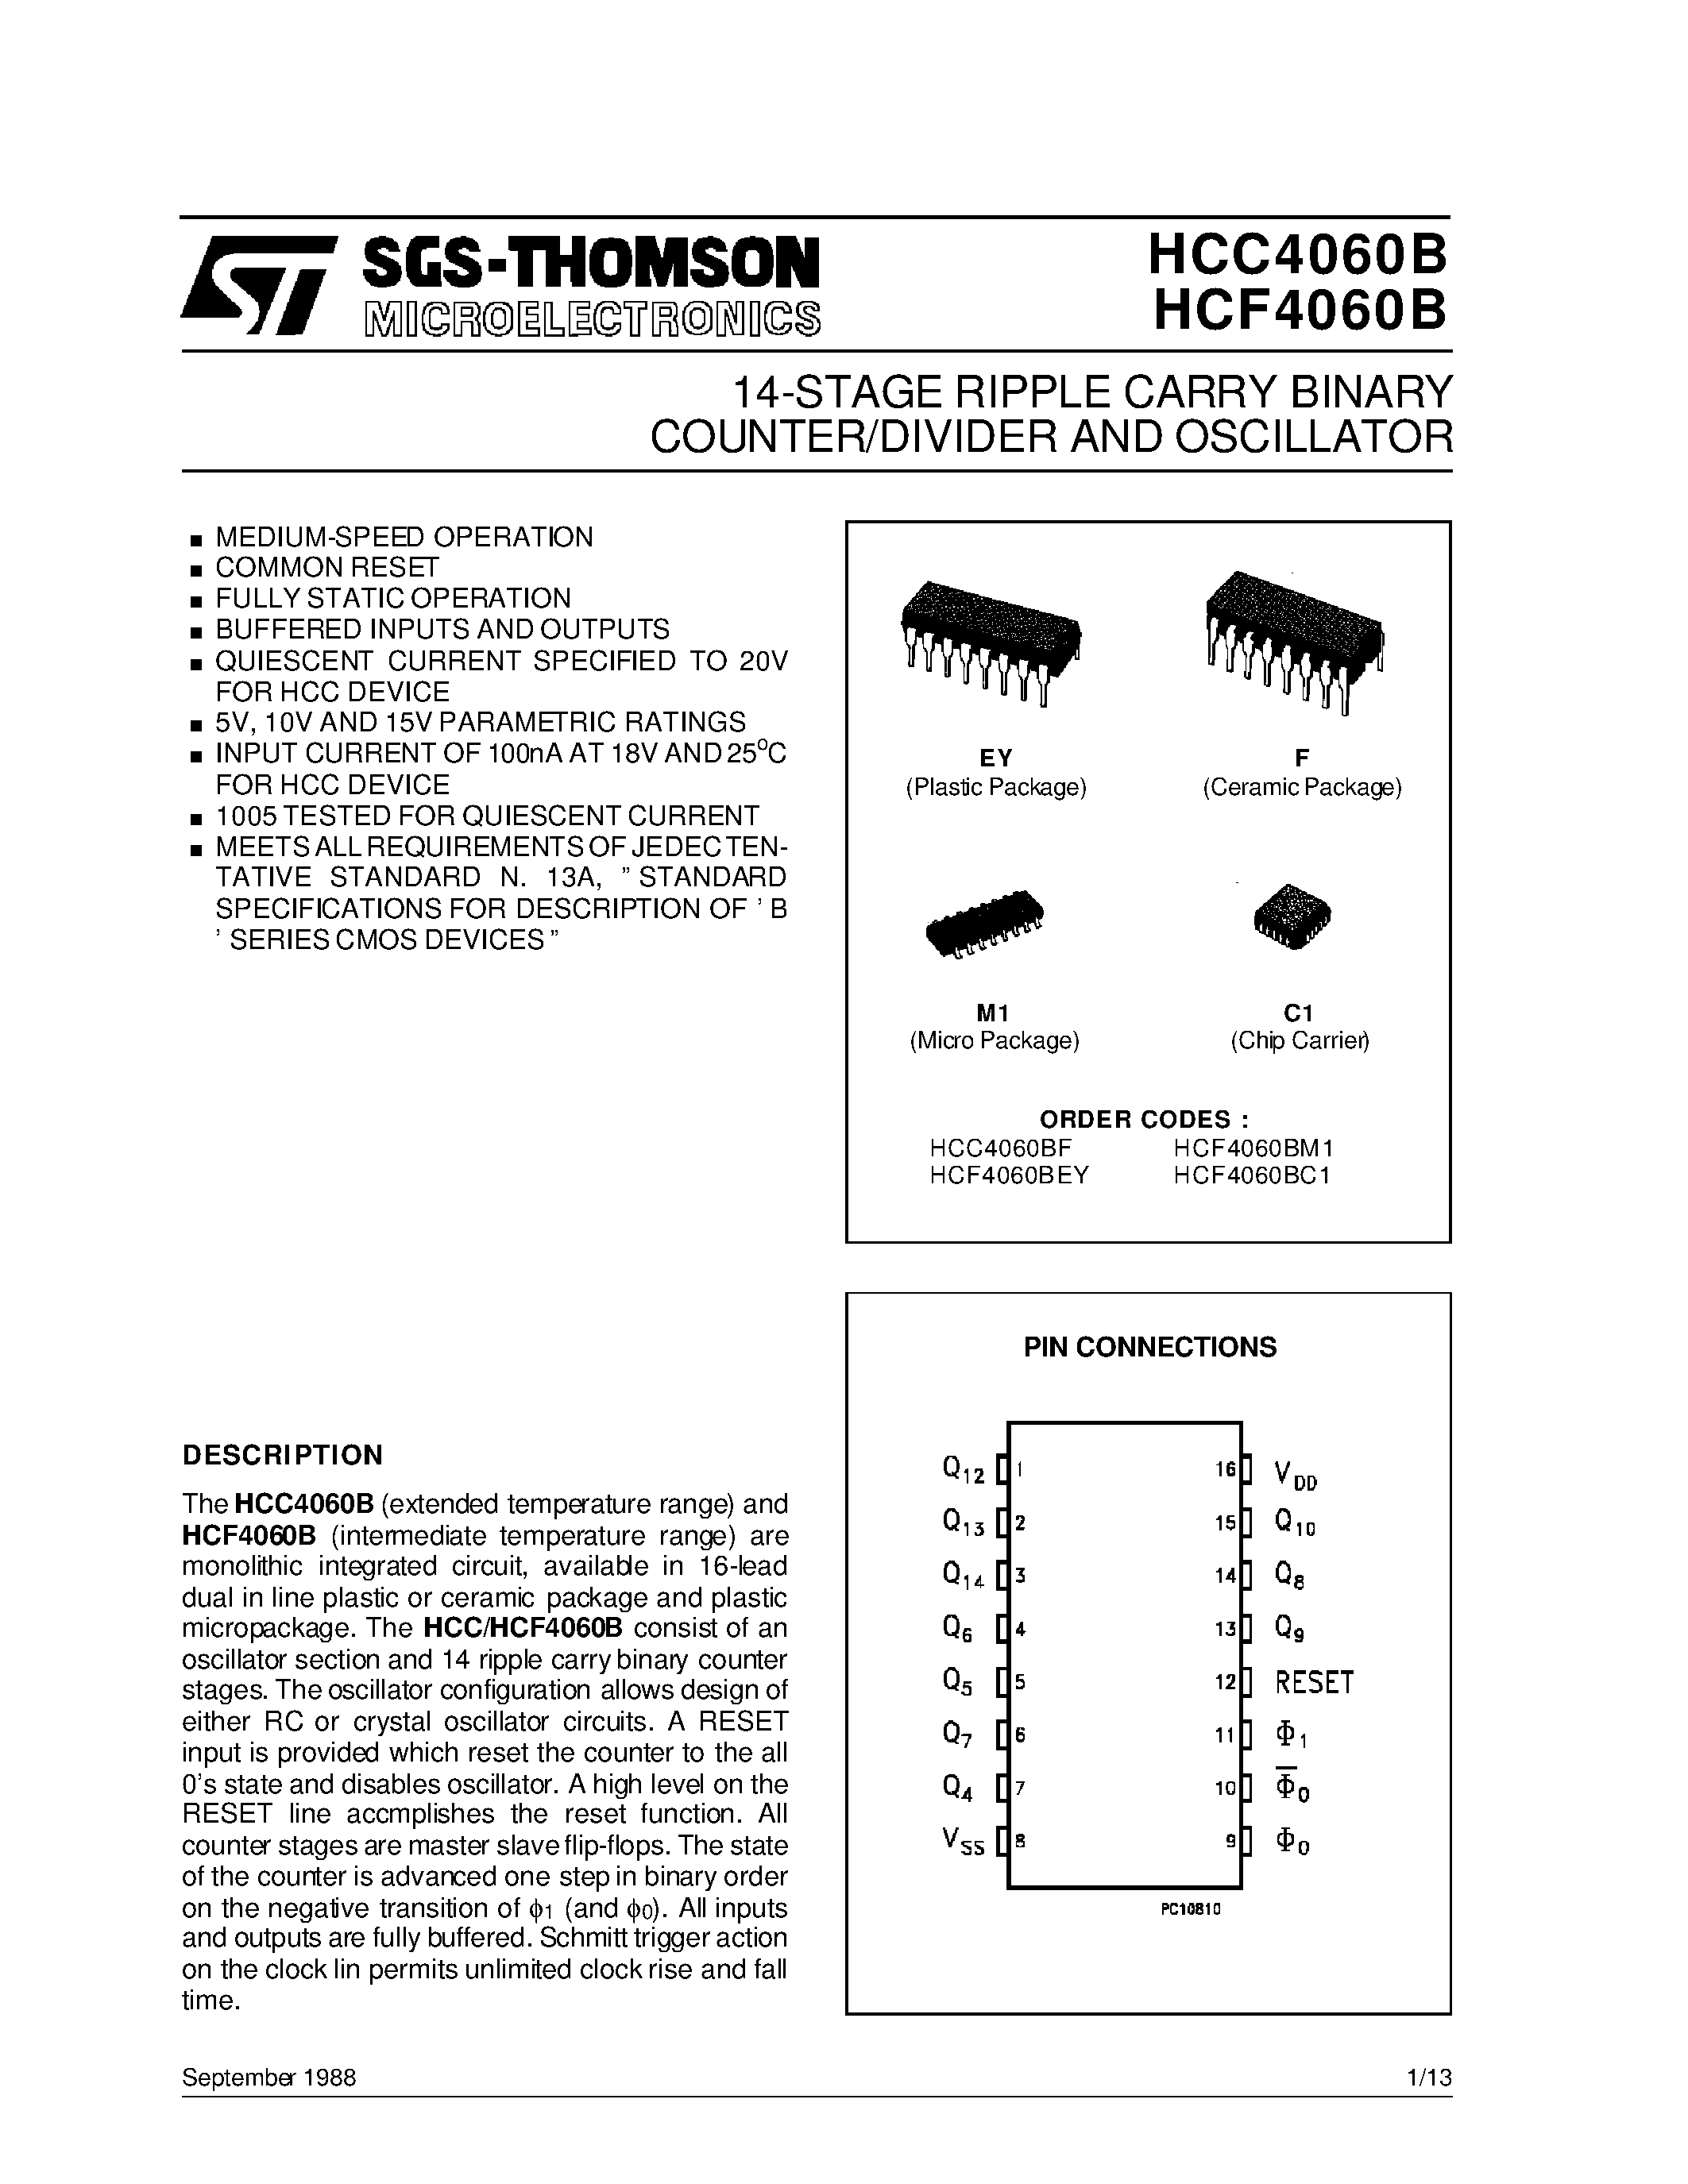 Datasheet HCF4060BEY - COUNTER/DIVIDER AND OSCILLATOR 14-STAGE RIPPLE CARRY BINARY page 1